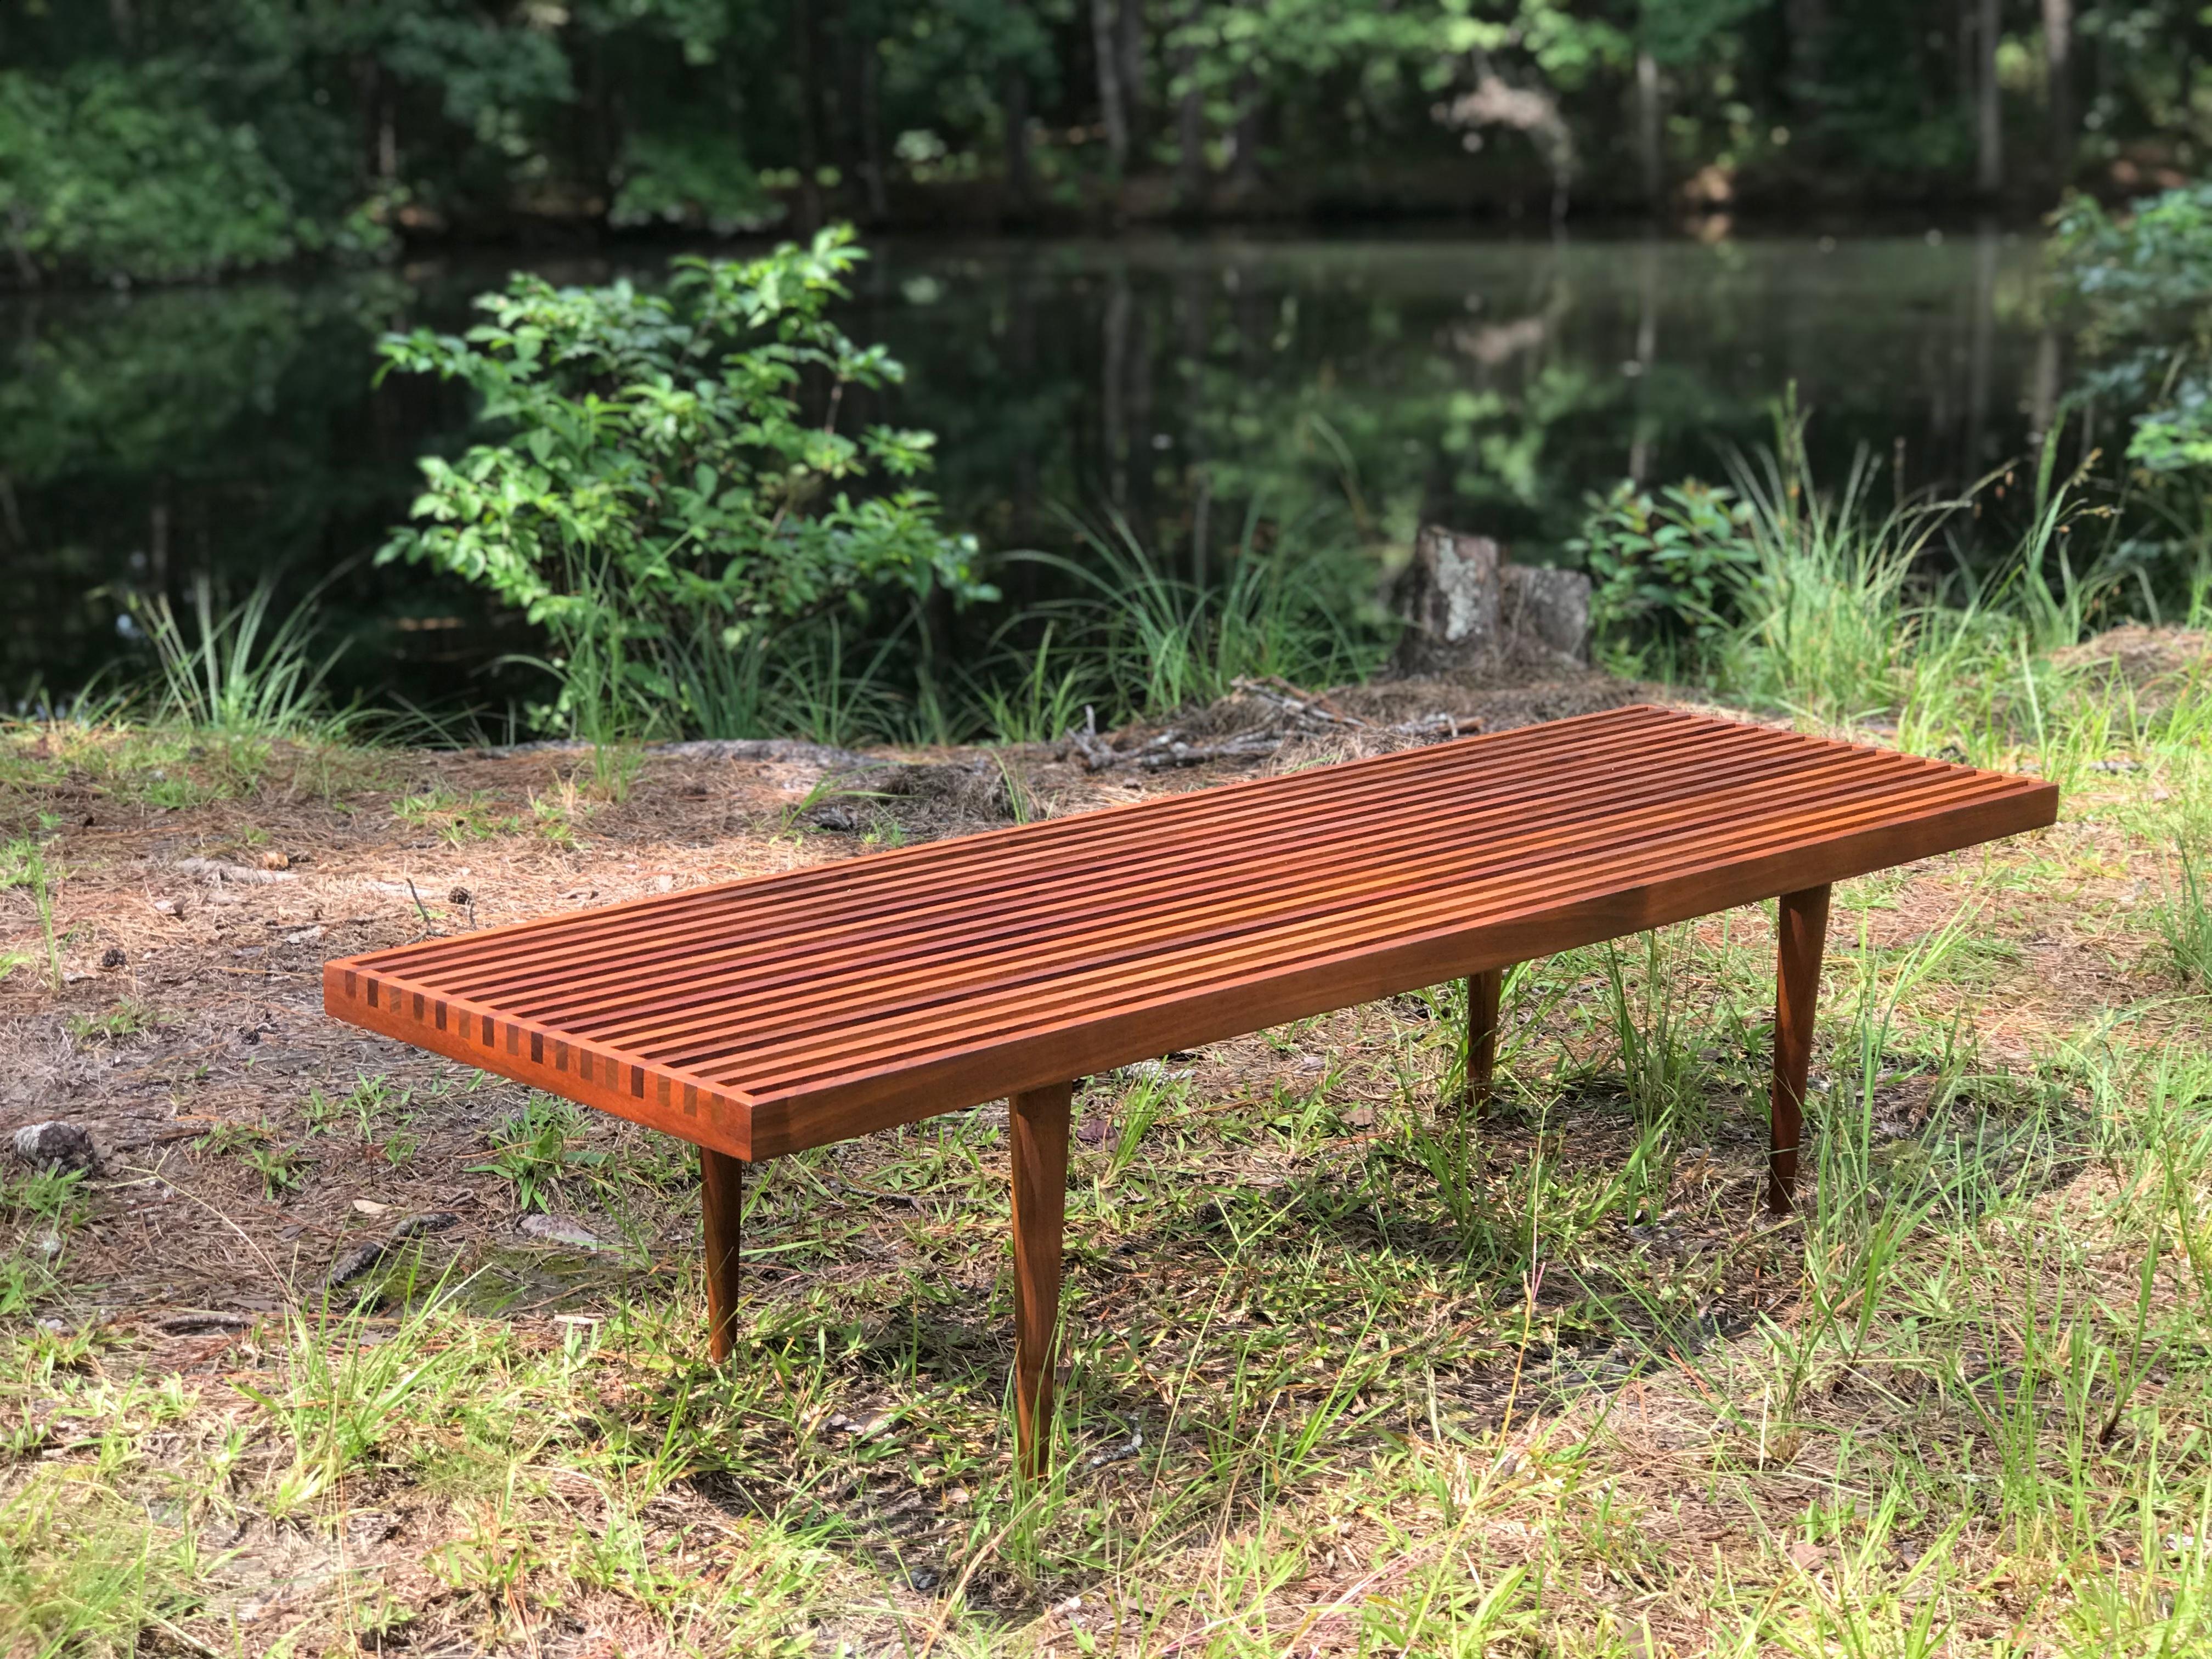 Excellent slat bench by Mel Smilow for Smilow-Thielle Furniture; 1950's. I love these slat benches - the finger joints on each end are an eye-catching detail, along with the joinery at the corners. I refinished this using oil and it turned out